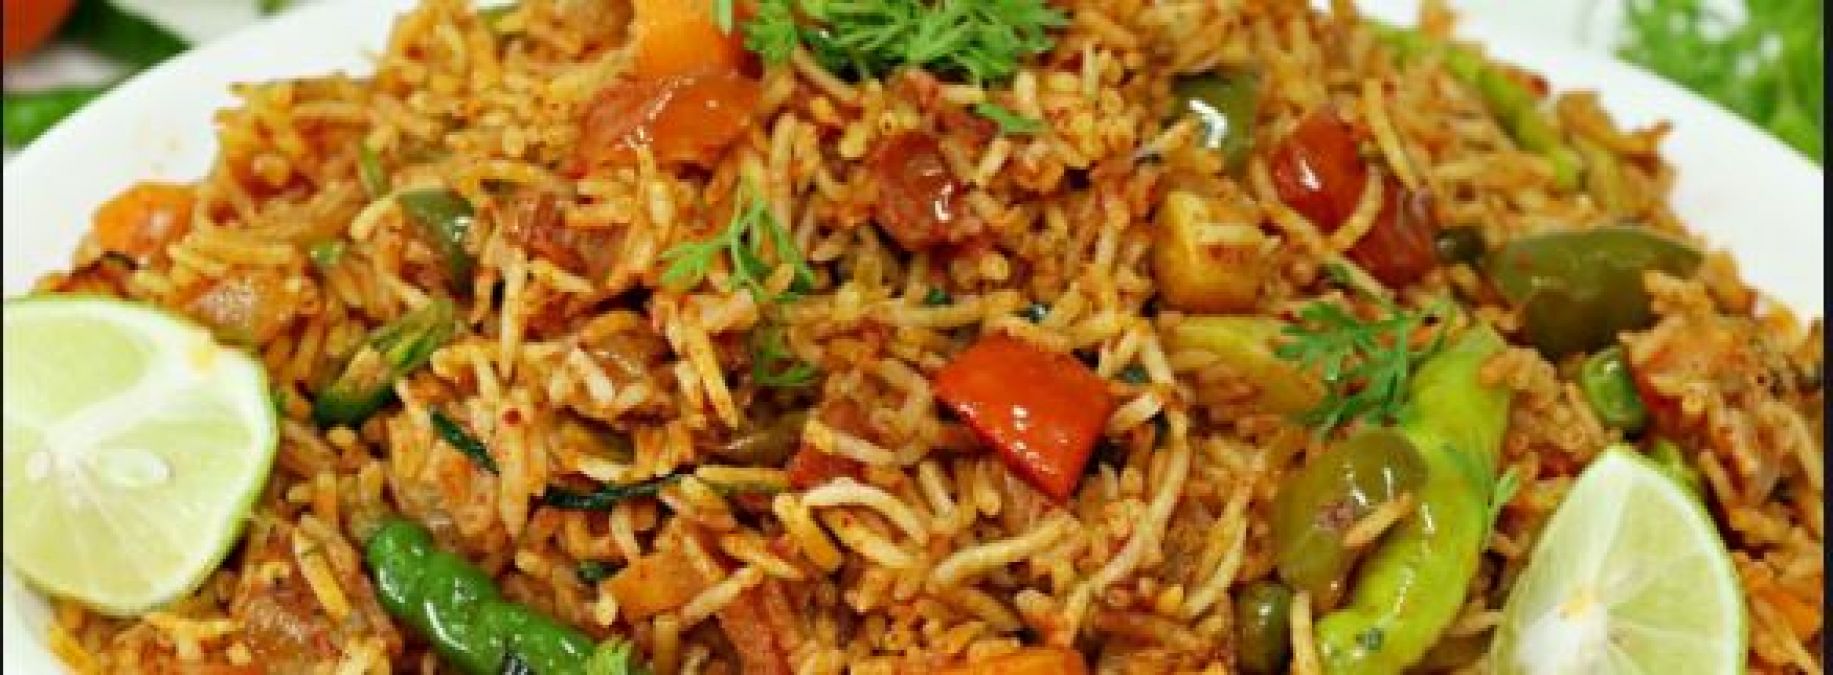 If you are fond of street food, make tawa pulao in Mumbai style today